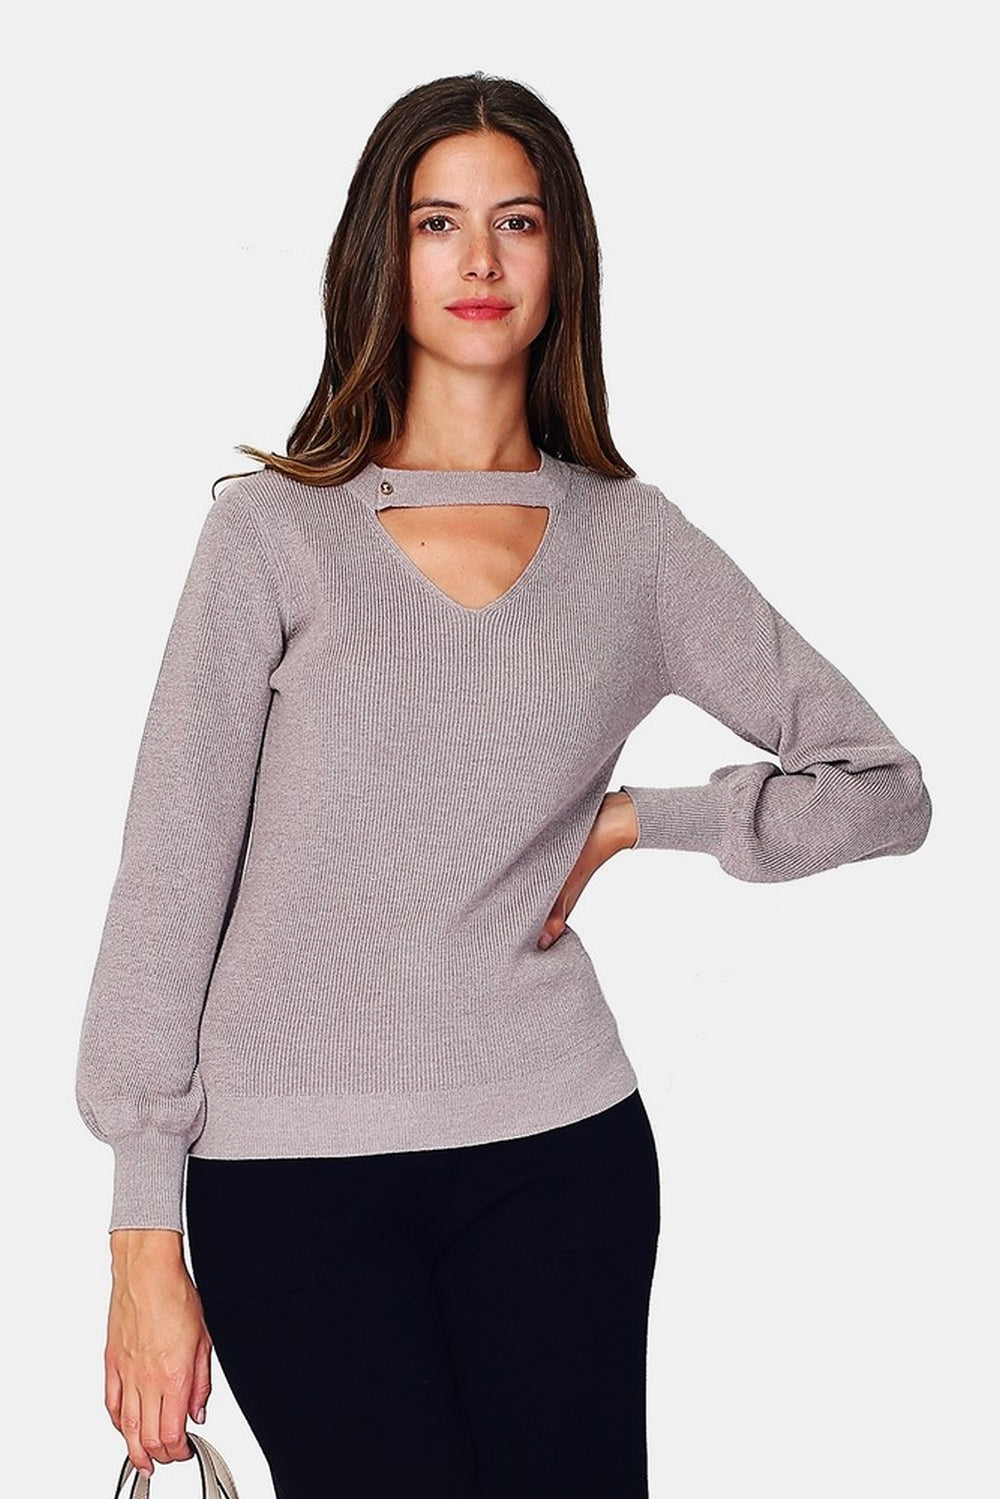 V-neck sweater, closed by a pearl button placket with long sleeves